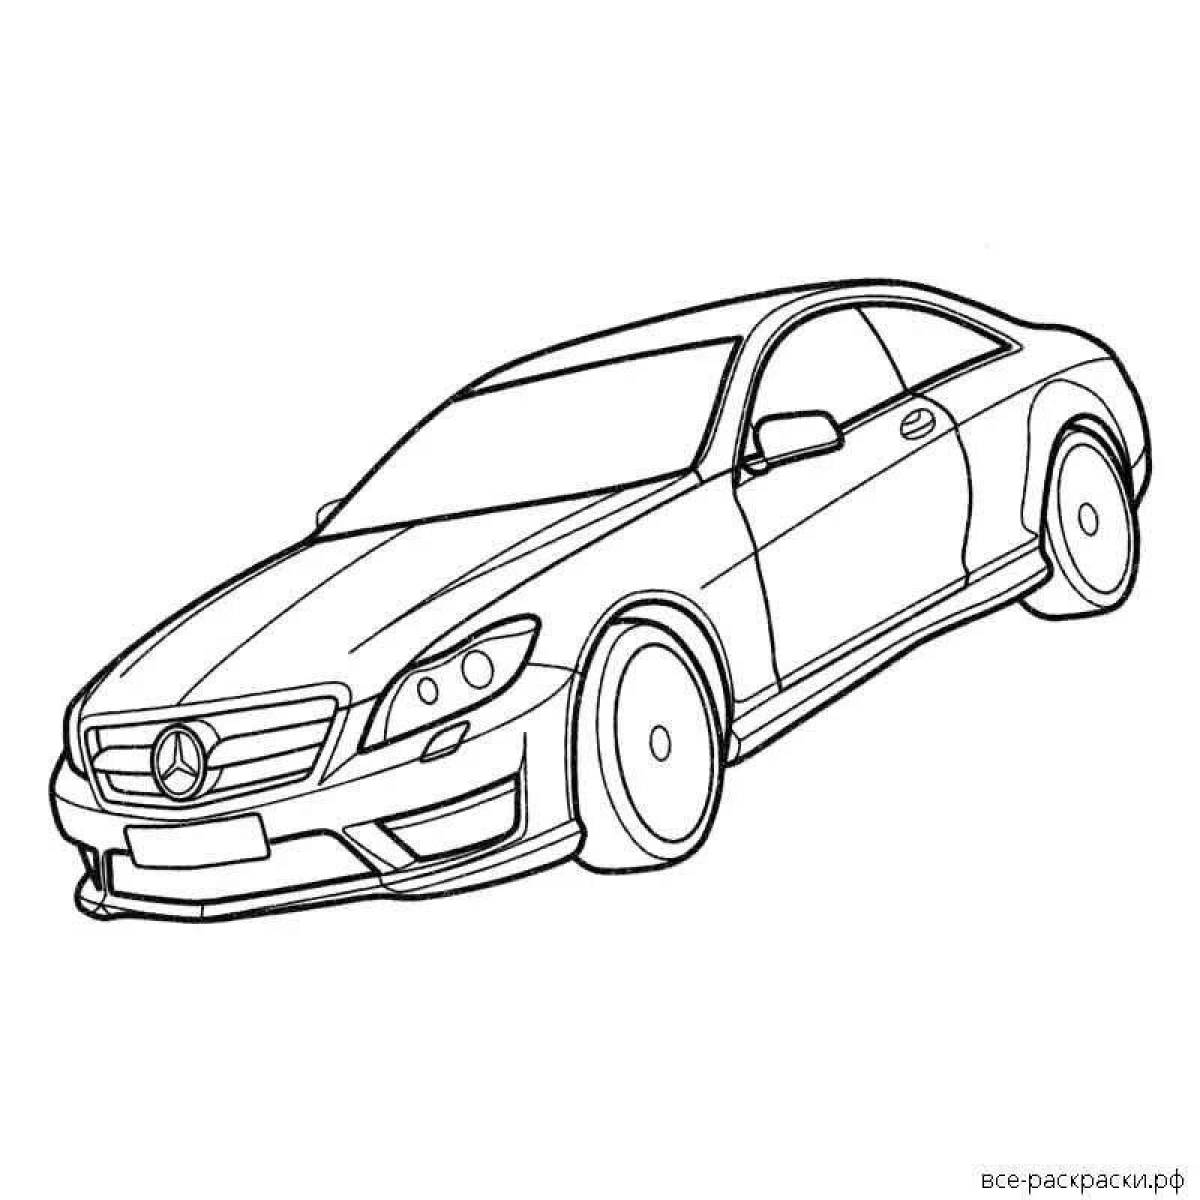 Awesome mercedes shark coloring page